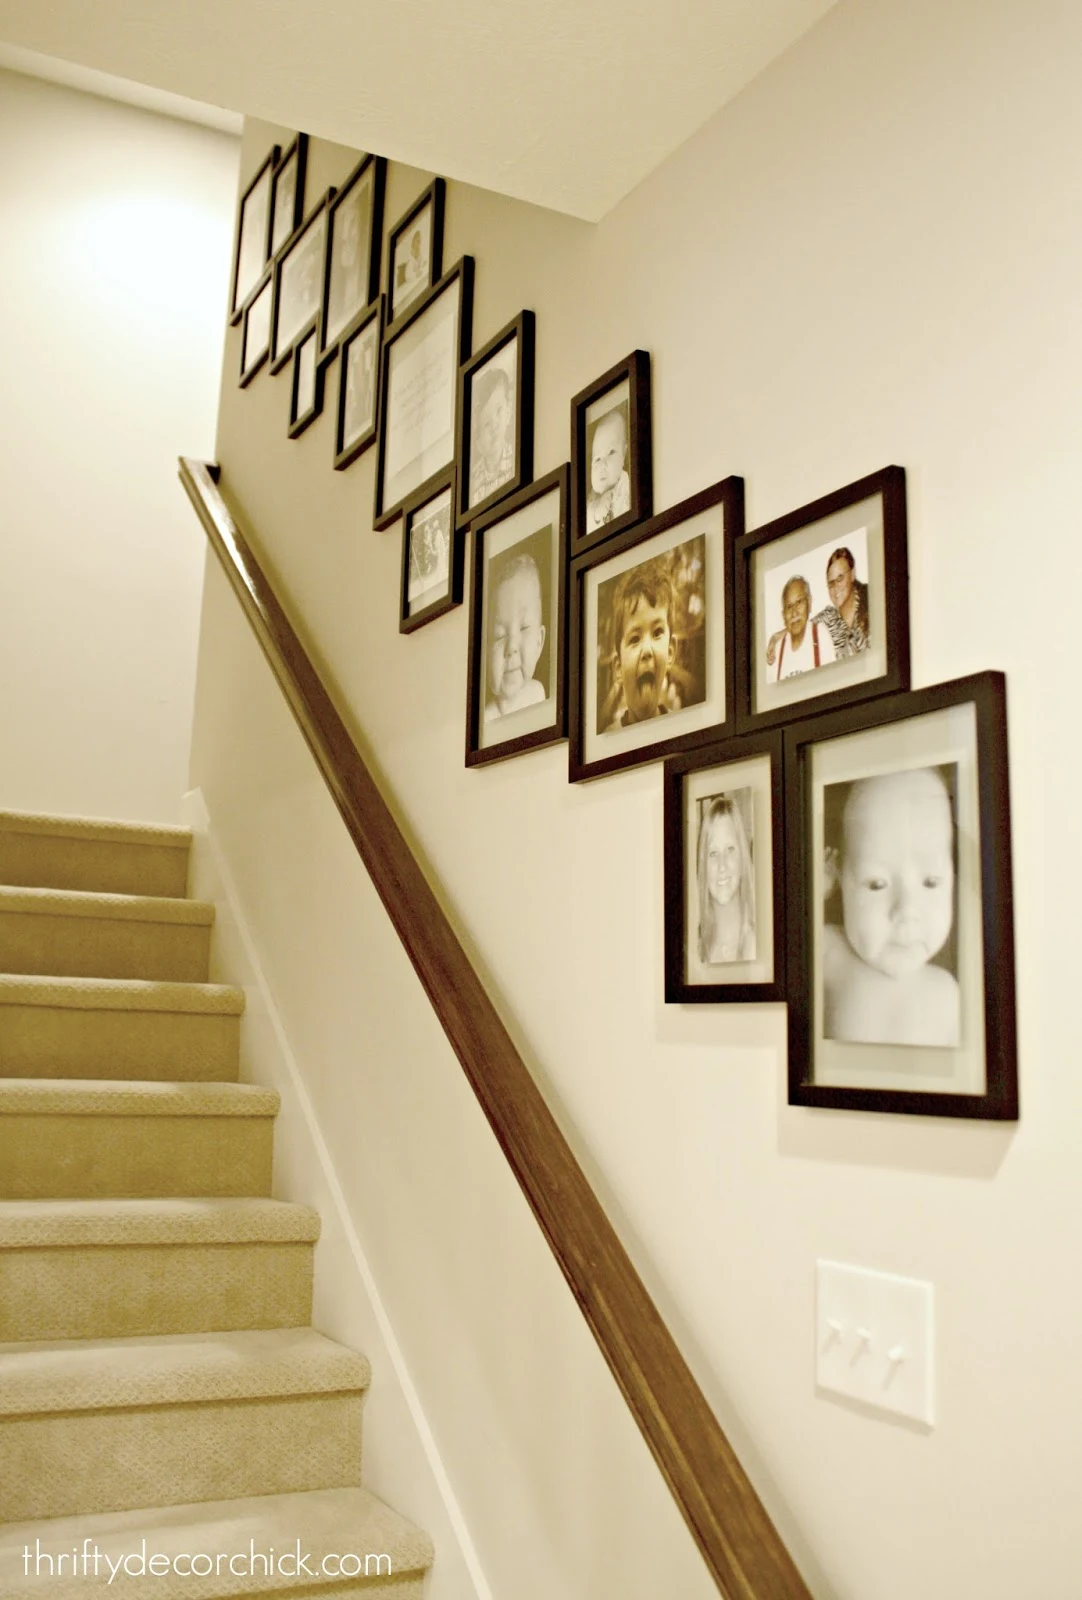 Gallery wall with frames touching